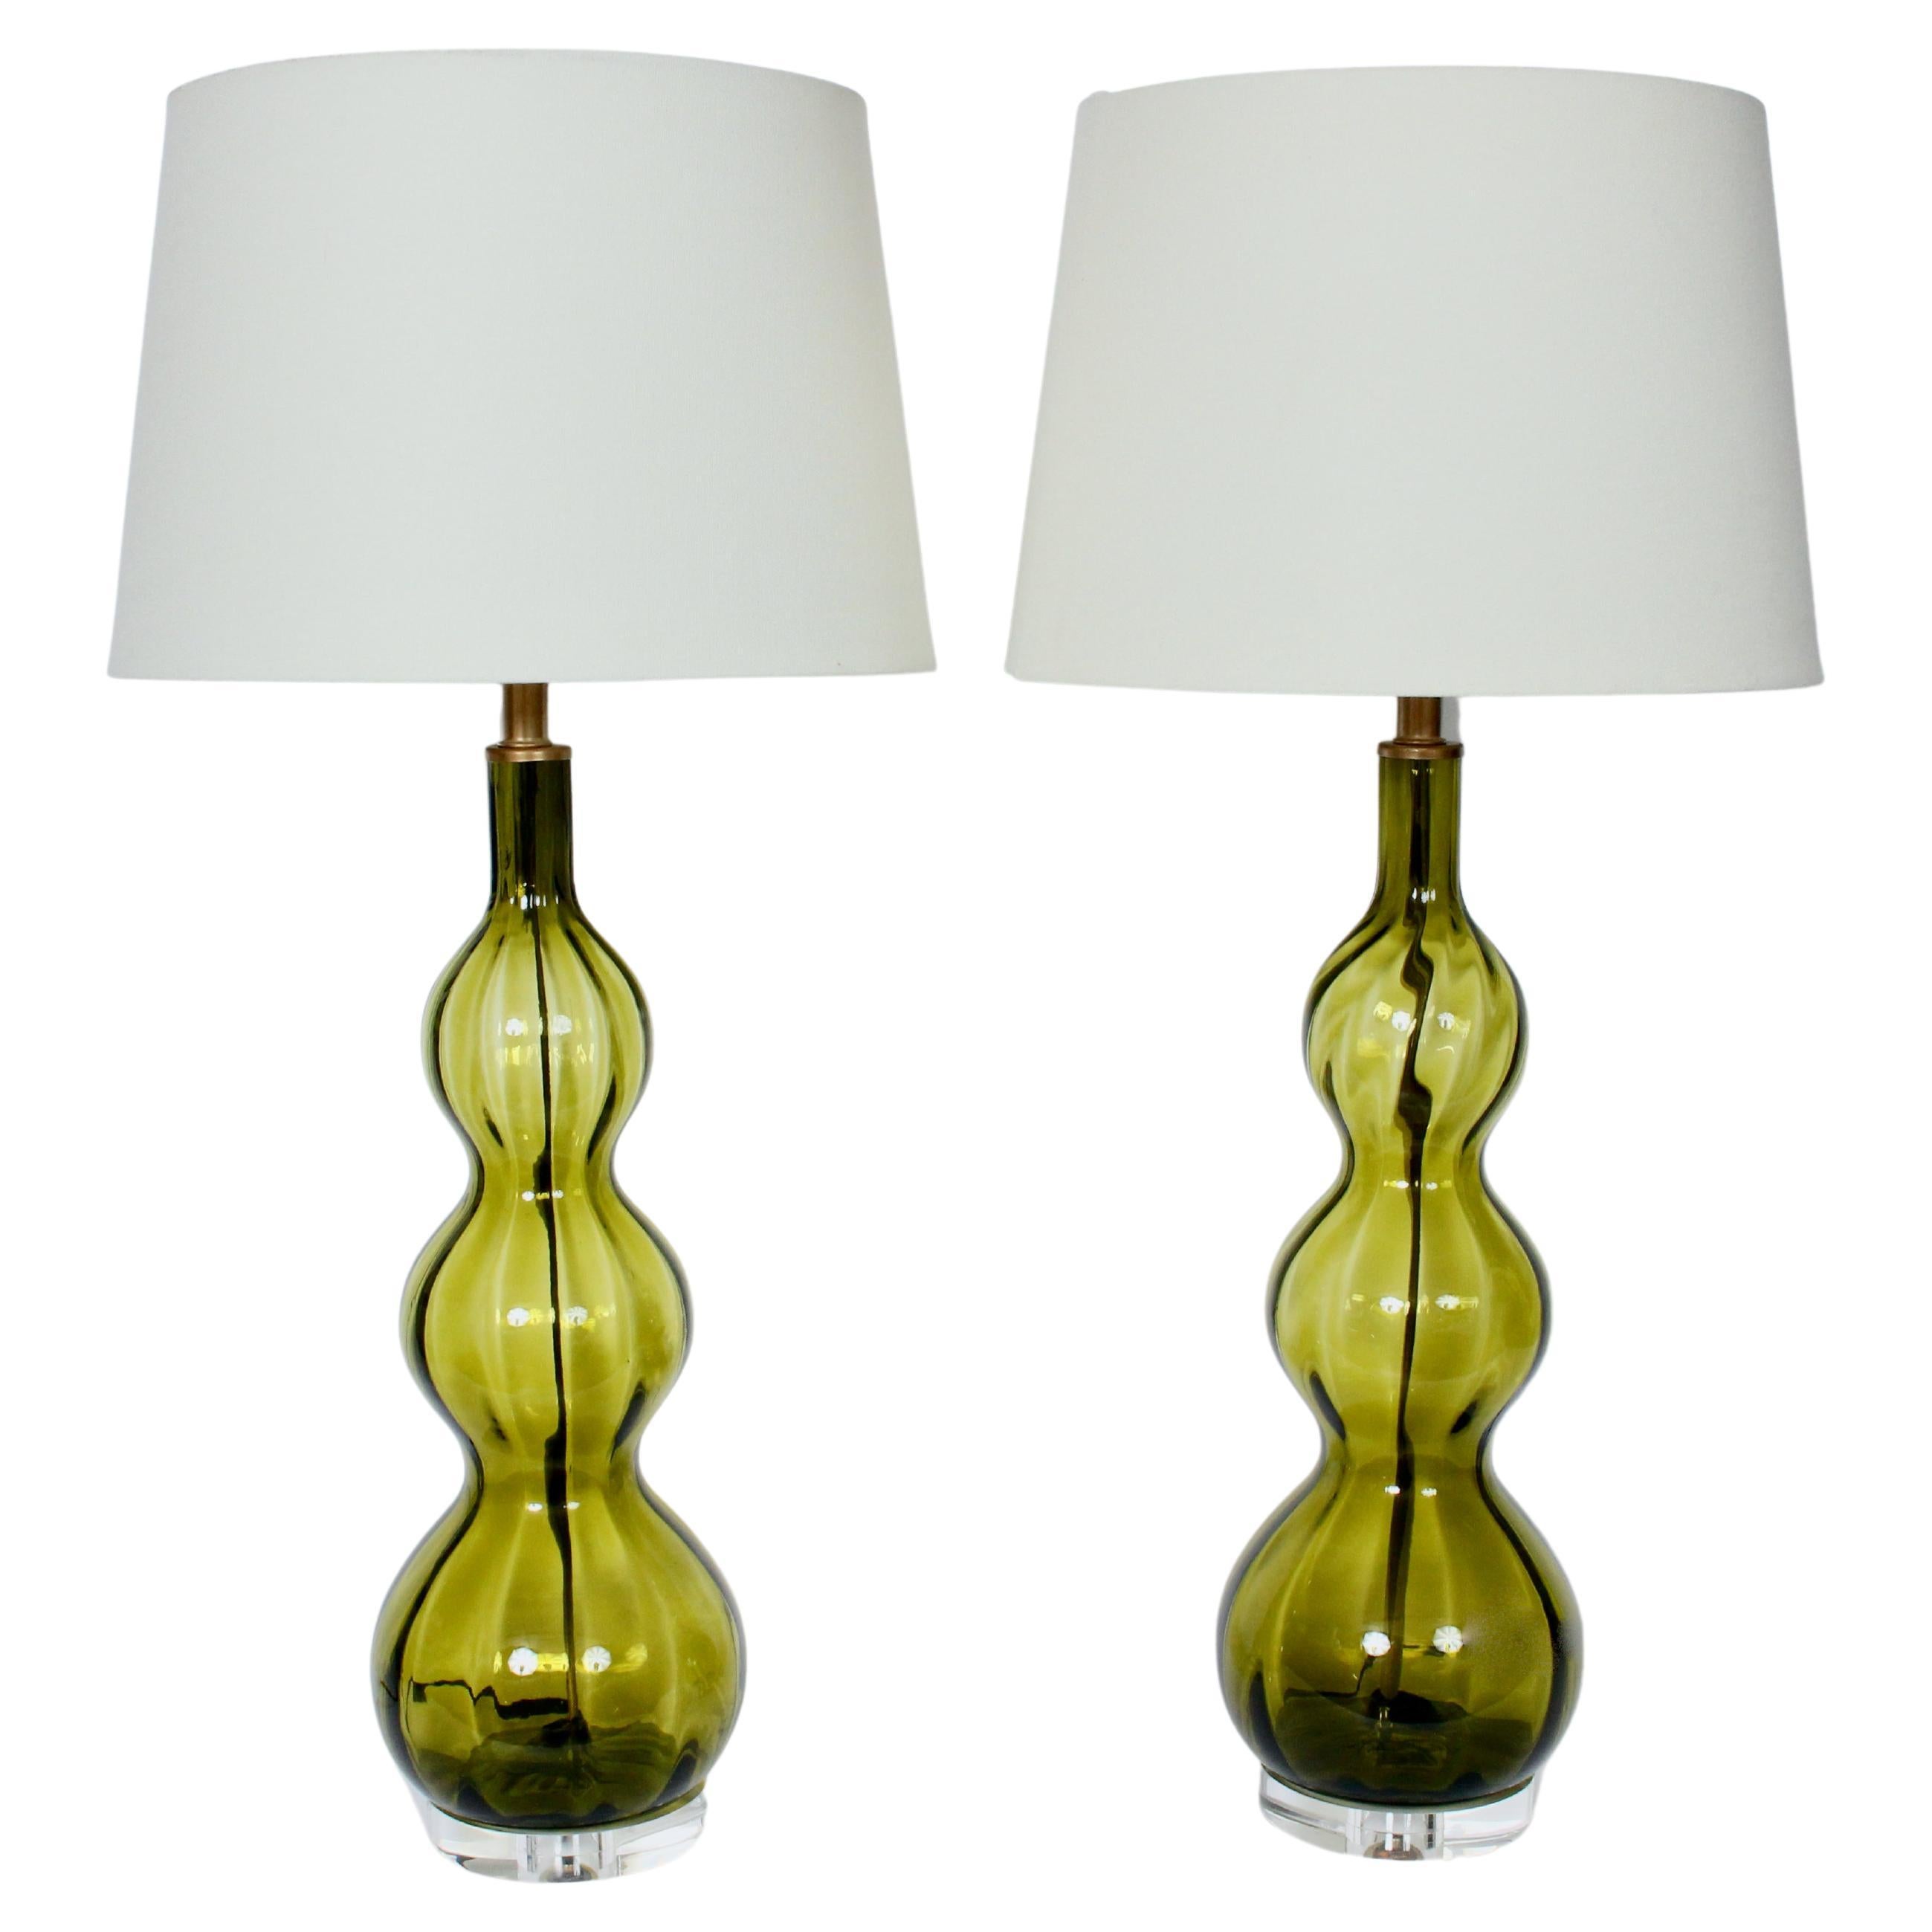 Tall Pair of Stacked Triple Gourd Olive Green Art Glass Table Lamps, 1950s For Sale